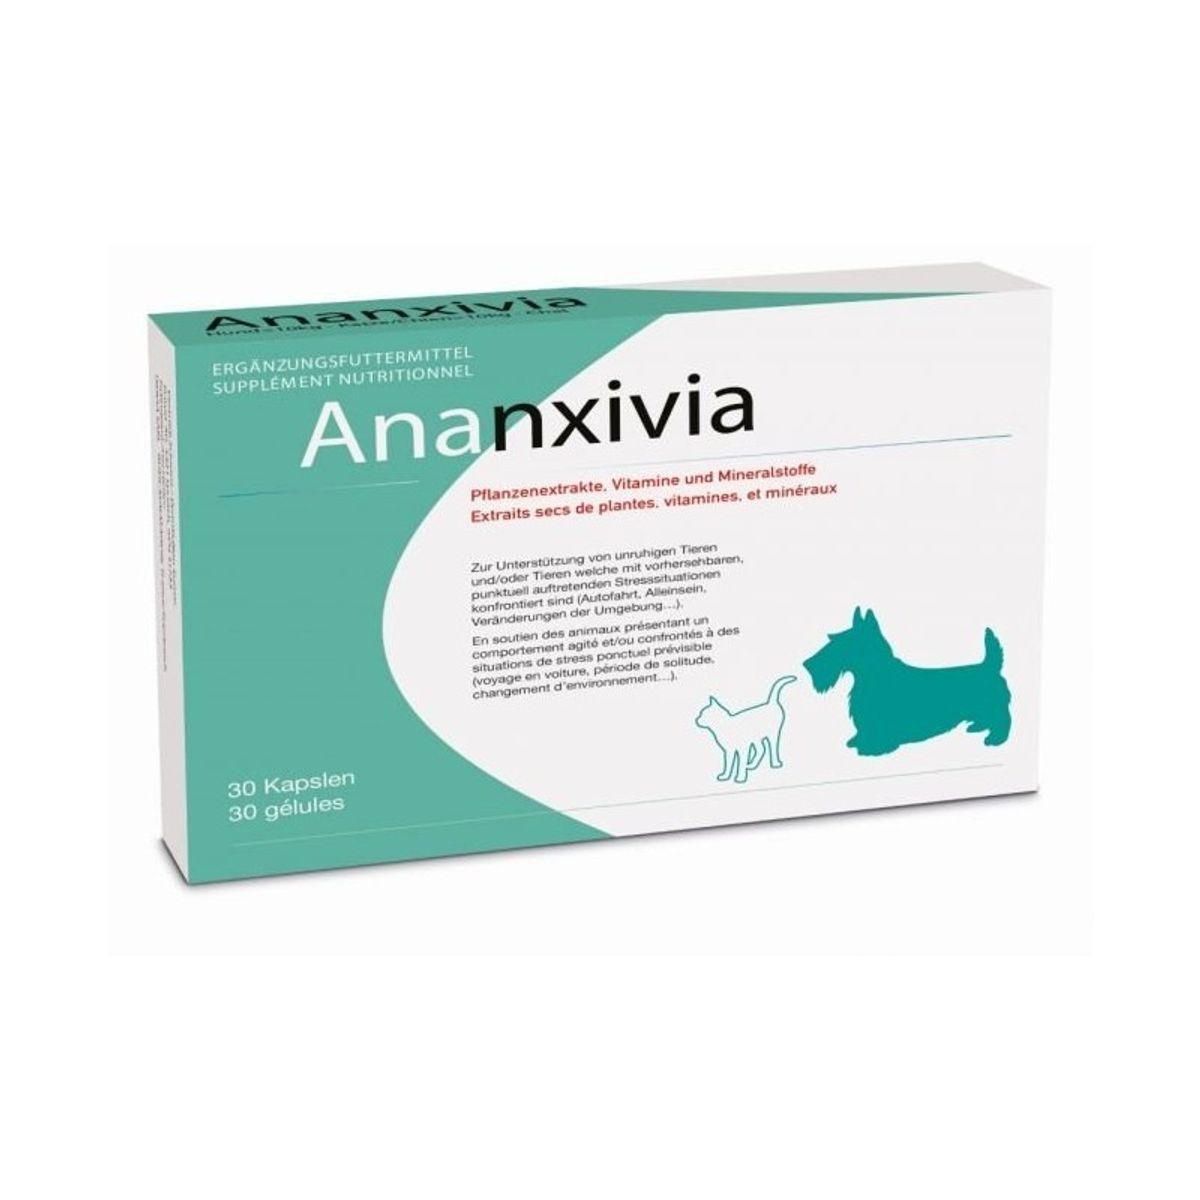 Ananxivia petits chiens et chats - Isovia